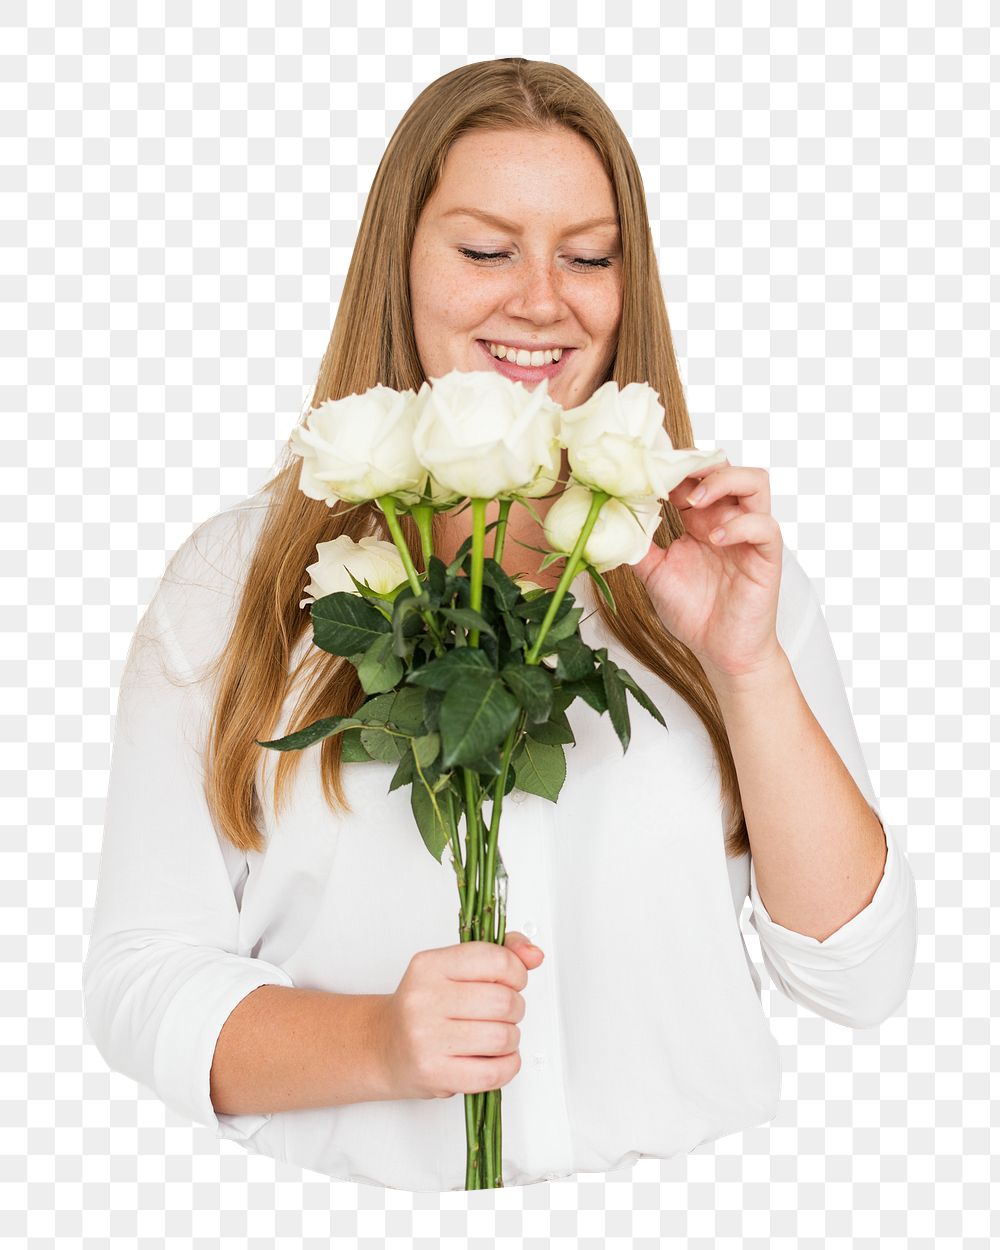 Woman holding rose bouquet png, transparent background